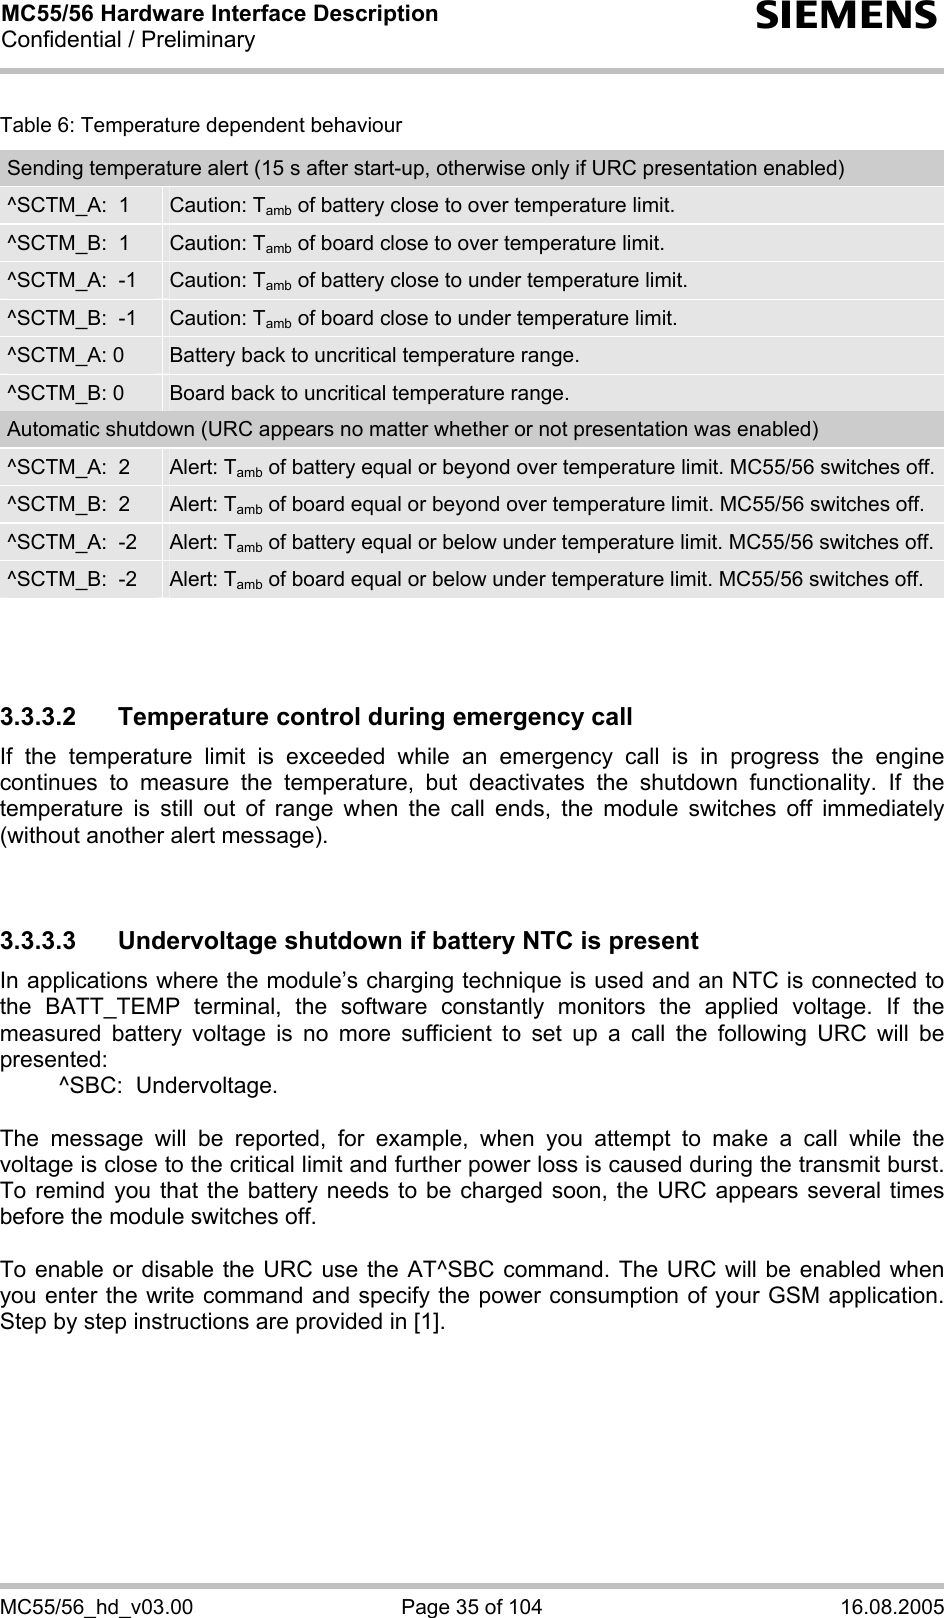 MC55/56 Hardware Interface Description Confidential / Preliminary s MC55/56_hd_v03.00  Page 35 of 104  16.08.2005 Table 6: Temperature dependent behaviour Sending temperature alert (15 s after start-up, otherwise only if URC presentation enabled) ^SCTM_A:  1  Caution: Tamb of battery close to over temperature limit. ^SCTM_B:  1  Caution: Tamb of board close to over temperature limit. ^SCTM_A:  -1  Caution: Tamb of battery close to under temperature limit. ^SCTM_B:  -1  Caution: Tamb of board close to under temperature limit. ^SCTM_A: 0  Battery back to uncritical temperature range. ^SCTM_B: 0  Board back to uncritical temperature range. Automatic shutdown (URC appears no matter whether or not presentation was enabled) ^SCTM_A:  2  Alert: Tamb of battery equal or beyond over temperature limit. MC55/56 switches off. ^SCTM_B:  2  Alert: Tamb of board equal or beyond over temperature limit. MC55/56 switches off. ^SCTM_A:  -2  Alert: Tamb of battery equal or below under temperature limit. MC55/56 switches off. ^SCTM_B:  -2  Alert: Tamb of board equal or below under temperature limit. MC55/56 switches off.    3.3.3.2  Temperature control during emergency call If the temperature limit is exceeded while an emergency call is in progress the engine continues to measure the temperature, but deactivates the shutdown functionality. If the temperature is still out of range when the call ends, the module switches off immediately (without another alert message).   3.3.3.3  Undervoltage shutdown if battery NTC is present In applications where the module’s charging technique is used and an NTC is connected to the BATT_TEMP terminal, the software constantly monitors the applied voltage. If the measured battery voltage is no more sufficient to set up a call the following URC will be presented:    ^SBC:  Undervoltage.  The message will be reported, for example, when you attempt to make a call while the voltage is close to the critical limit and further power loss is caused during the transmit burst. To remind you that the battery needs to be charged soon, the URC appears several times before the module switches off.   To enable or disable the URC use the AT^SBC command. The URC will be enabled when you enter the write command and specify the power consumption of your GSM application. Step by step instructions are provided in [1].   